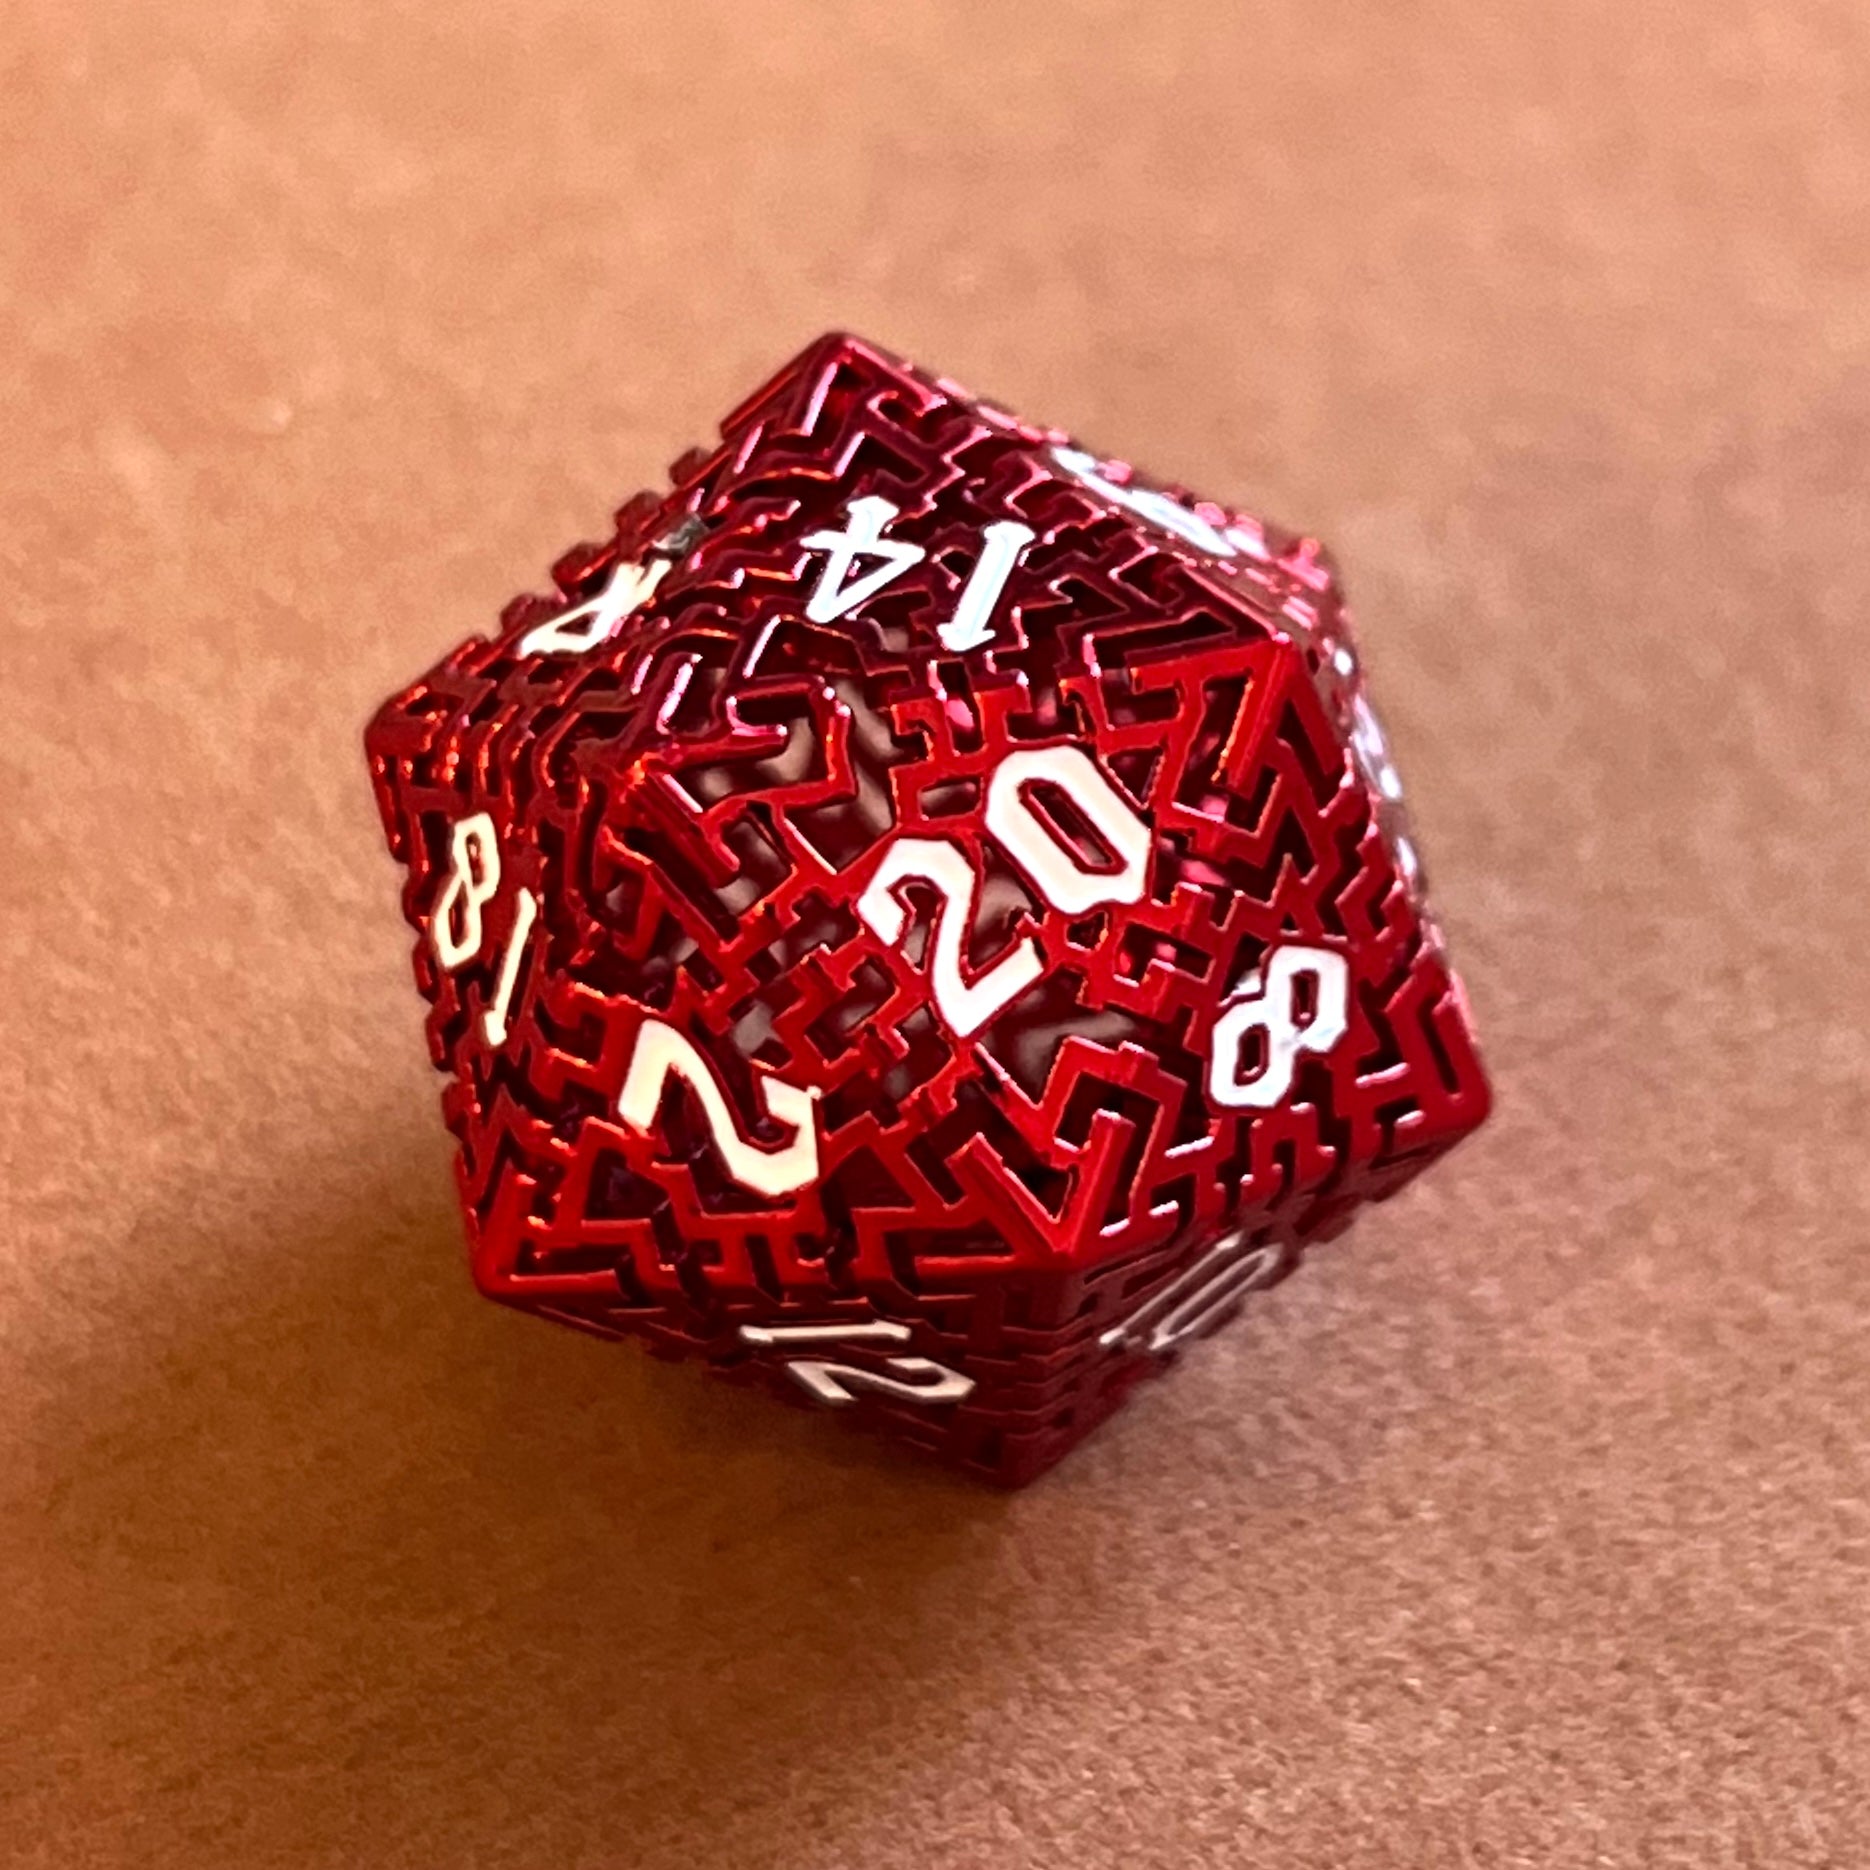 Metal Dnd dice sets, metal dice by Critical Kit, dice goblins, shiny math rocks